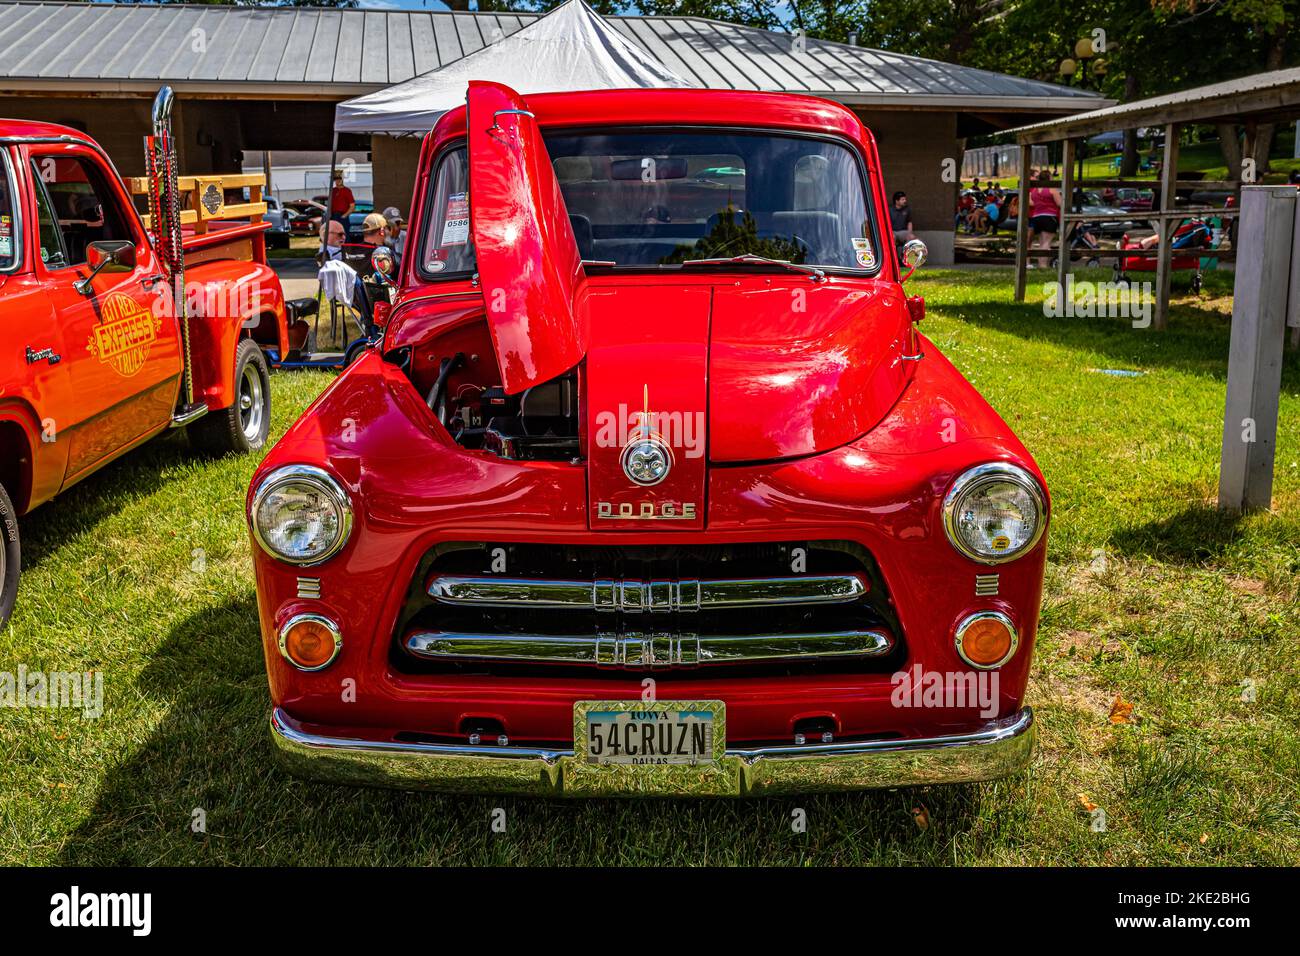 Des Moines, IA - July 02, 2022: High perspective front view of a 1954 Dodge C1 B6 Pickup Truck at a local car show. Stock Photo